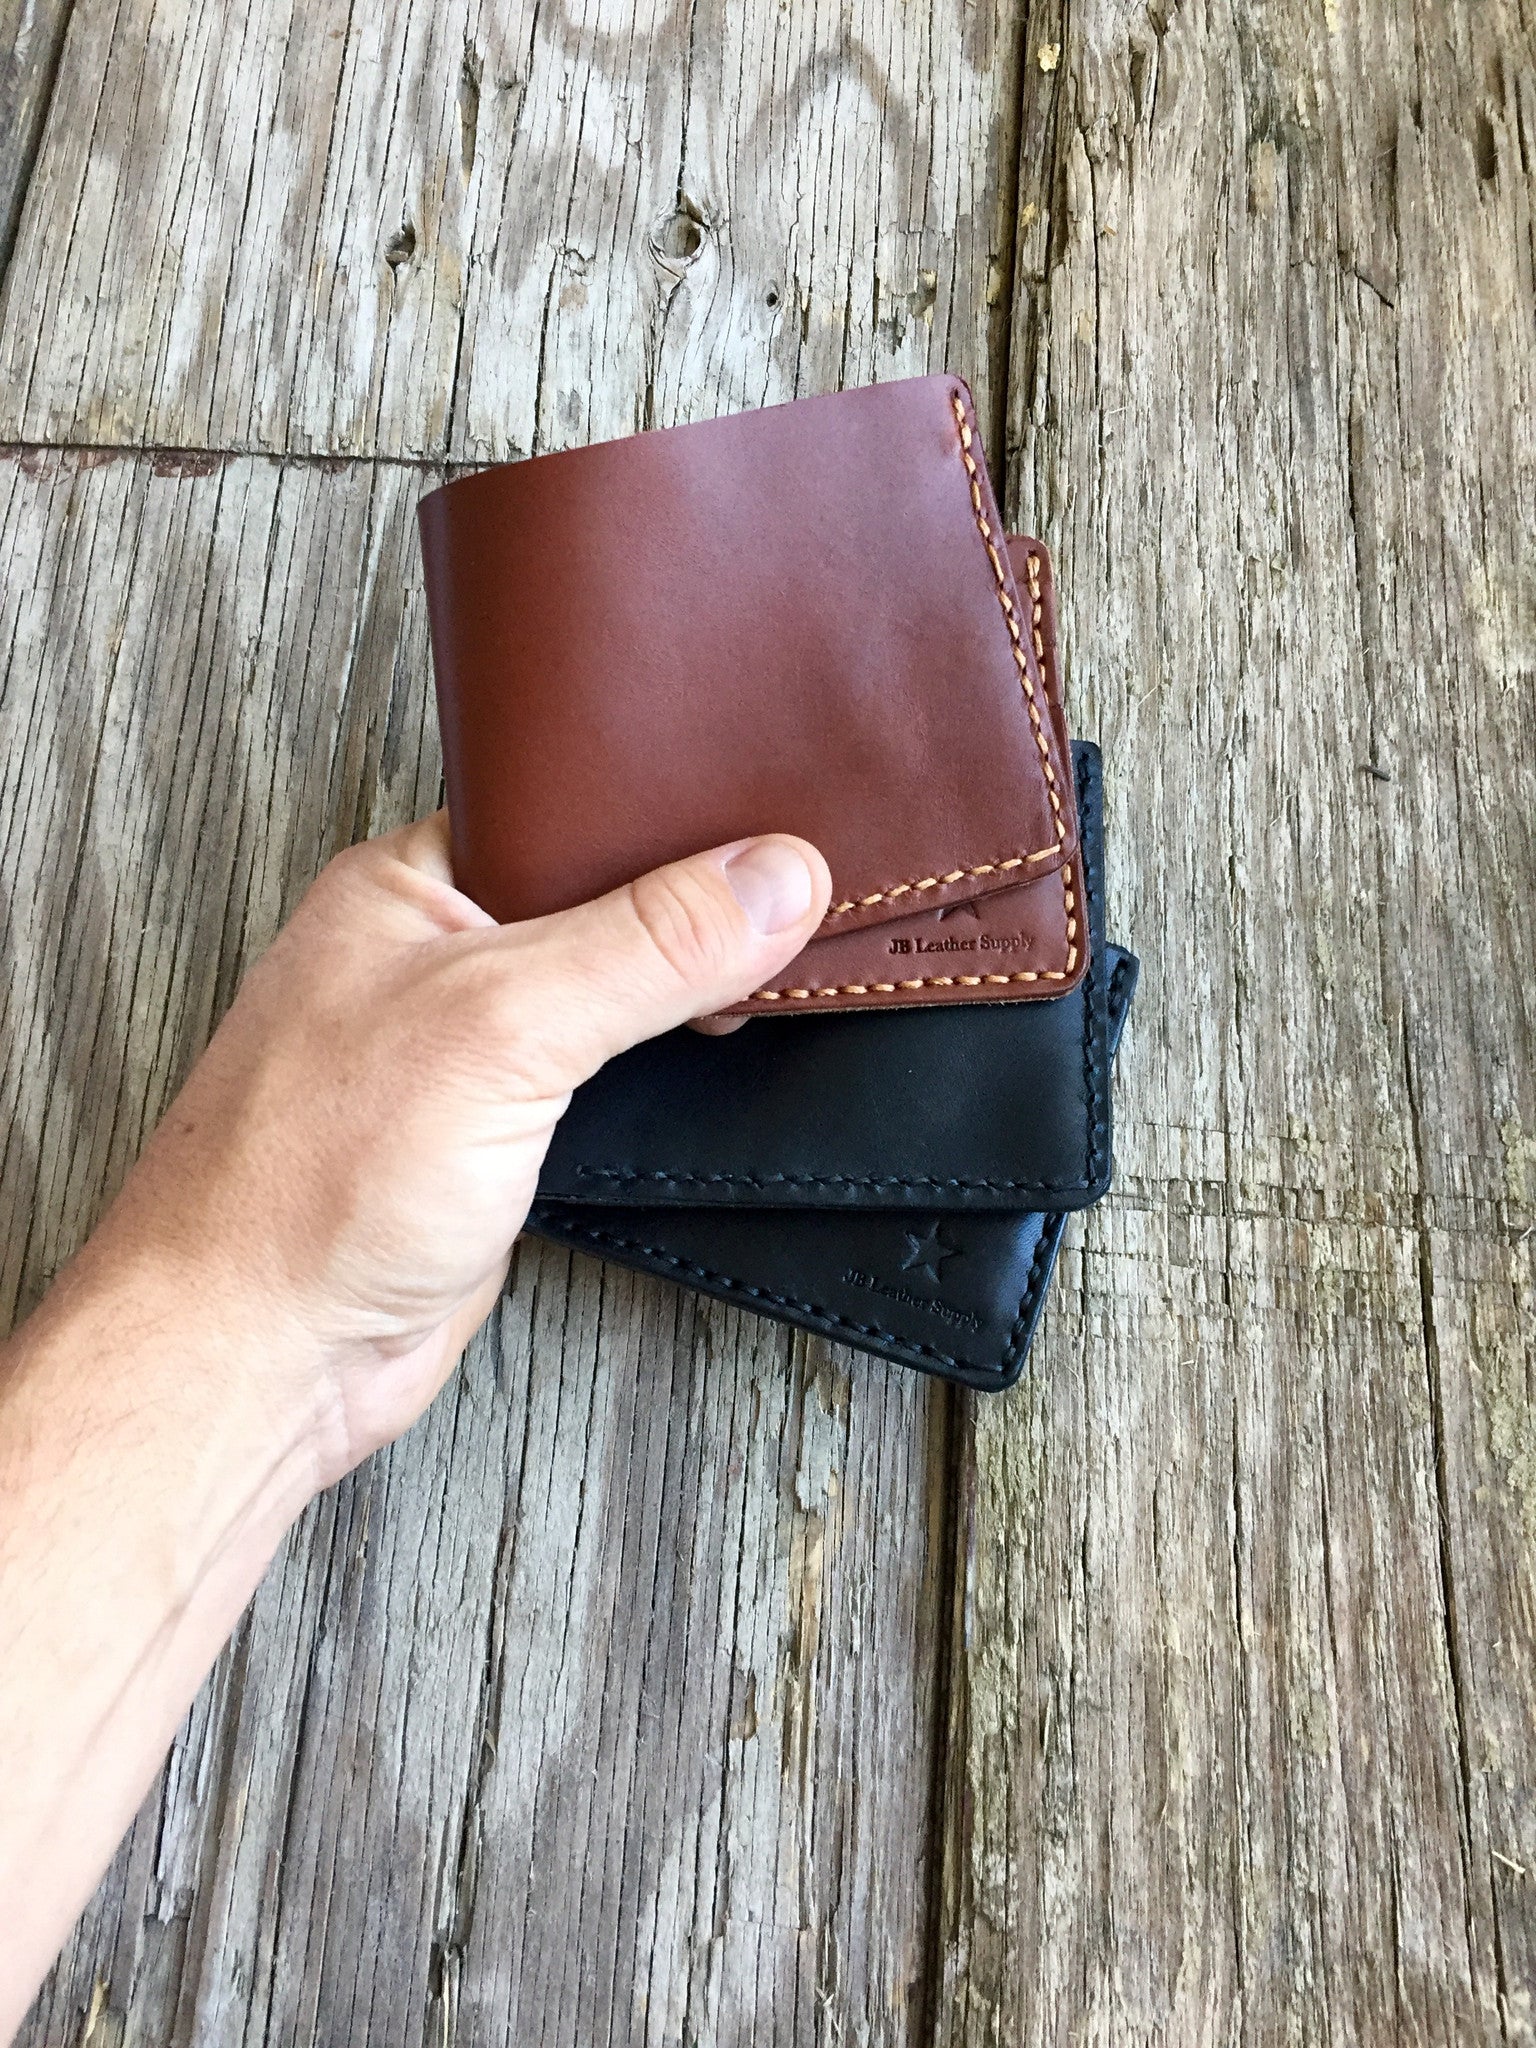 Alberta Classic Men Unisex wallet Black in Genuine Leather | Handmade Leather Soft Leather Purse